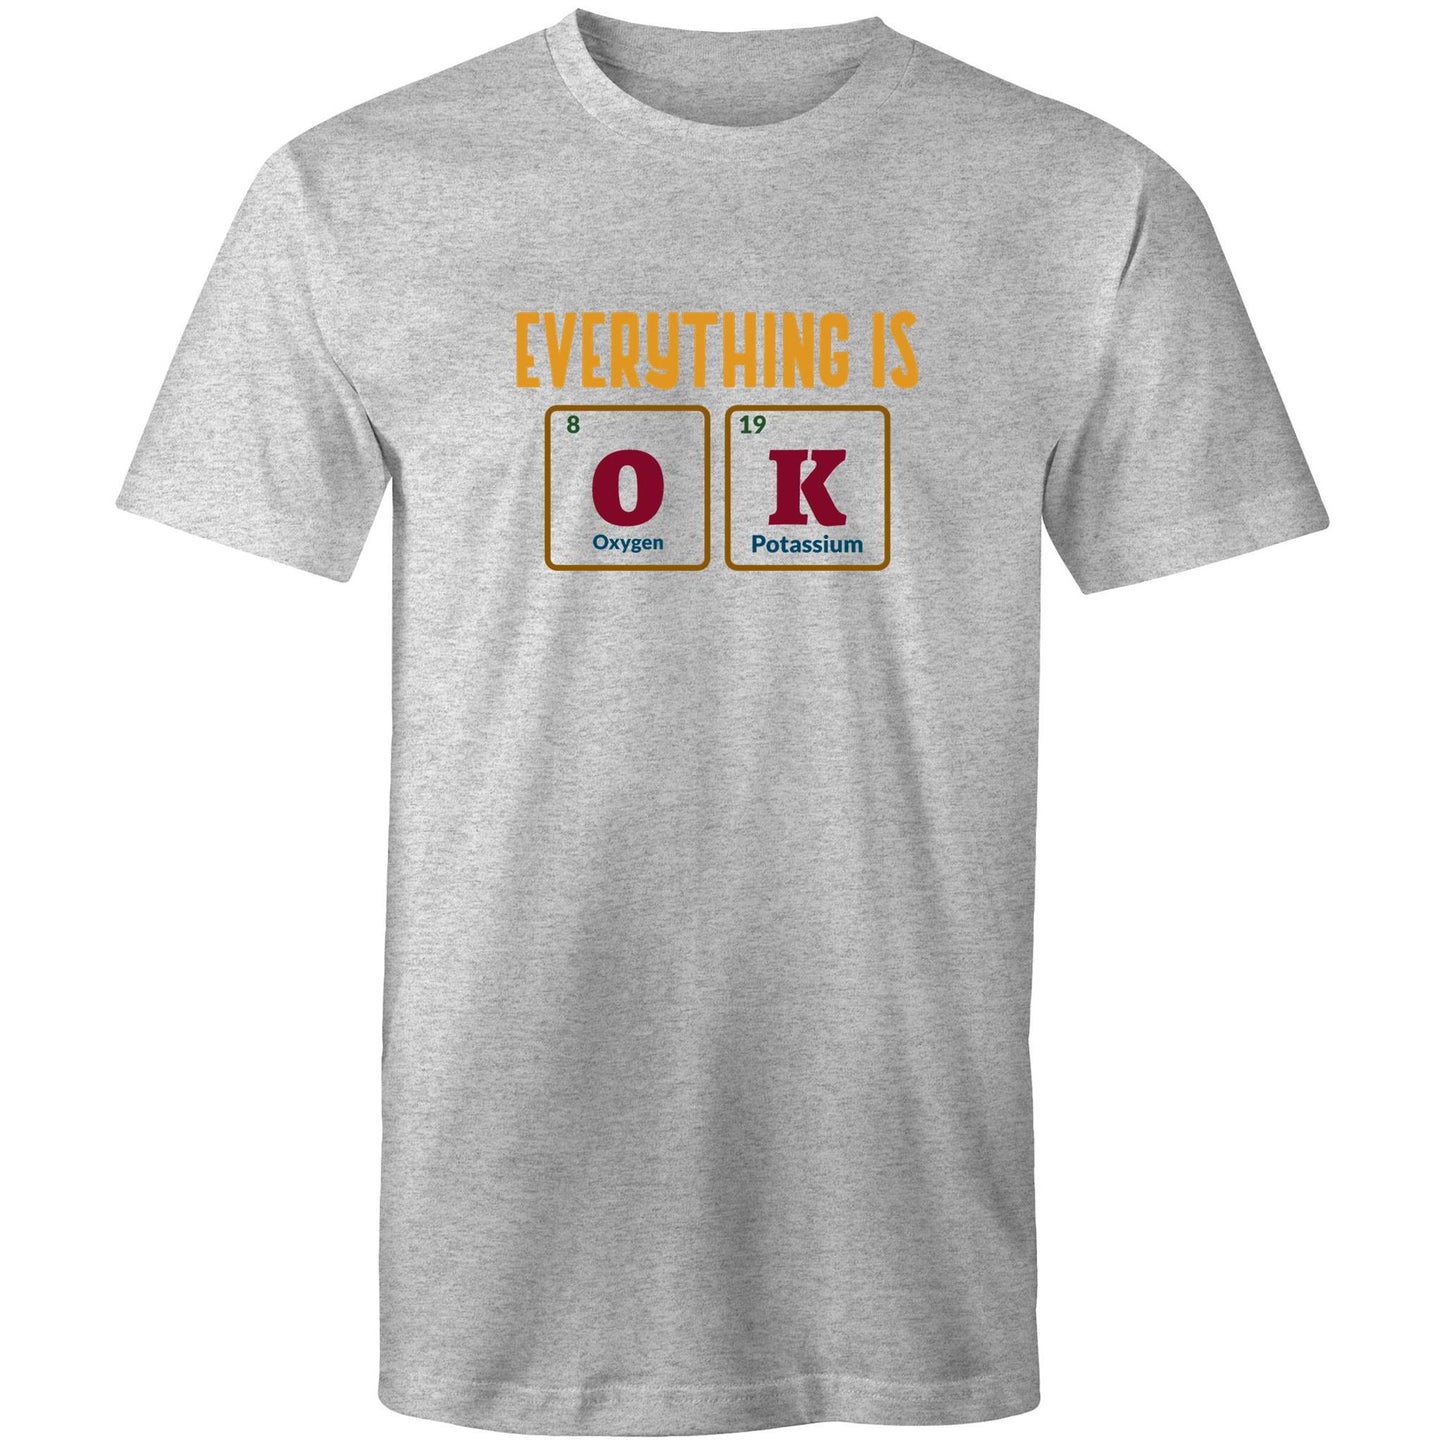 Everything Is OK, Periodic Table Of Elements - Mens T-Shirt Grey Marle Mens T-shirt Science